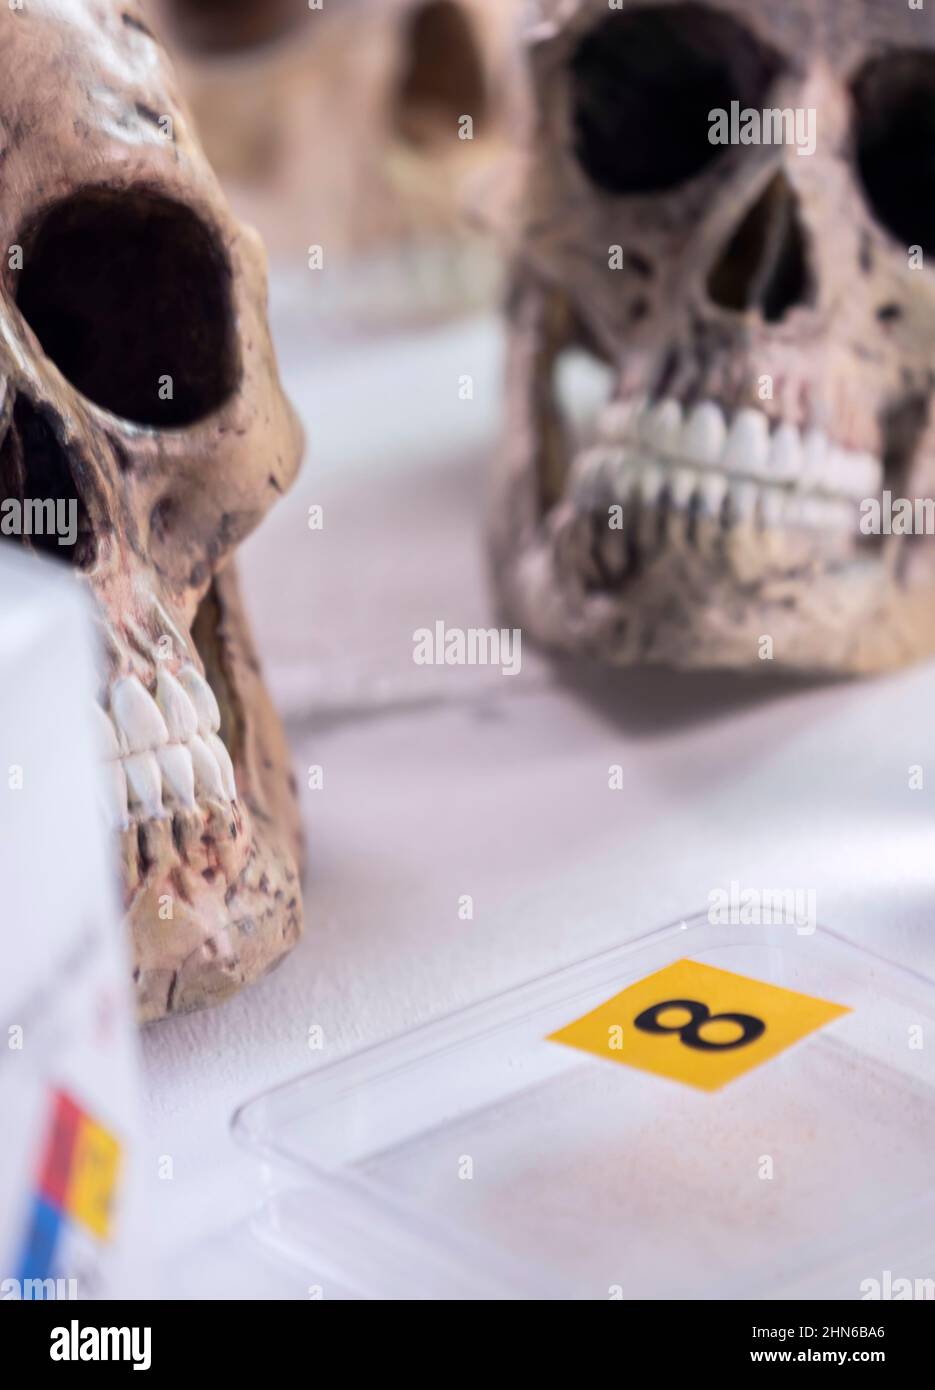 Several human skulls next to petri dish with bone remains to determine DNA in forensic laboratory Stock Photo